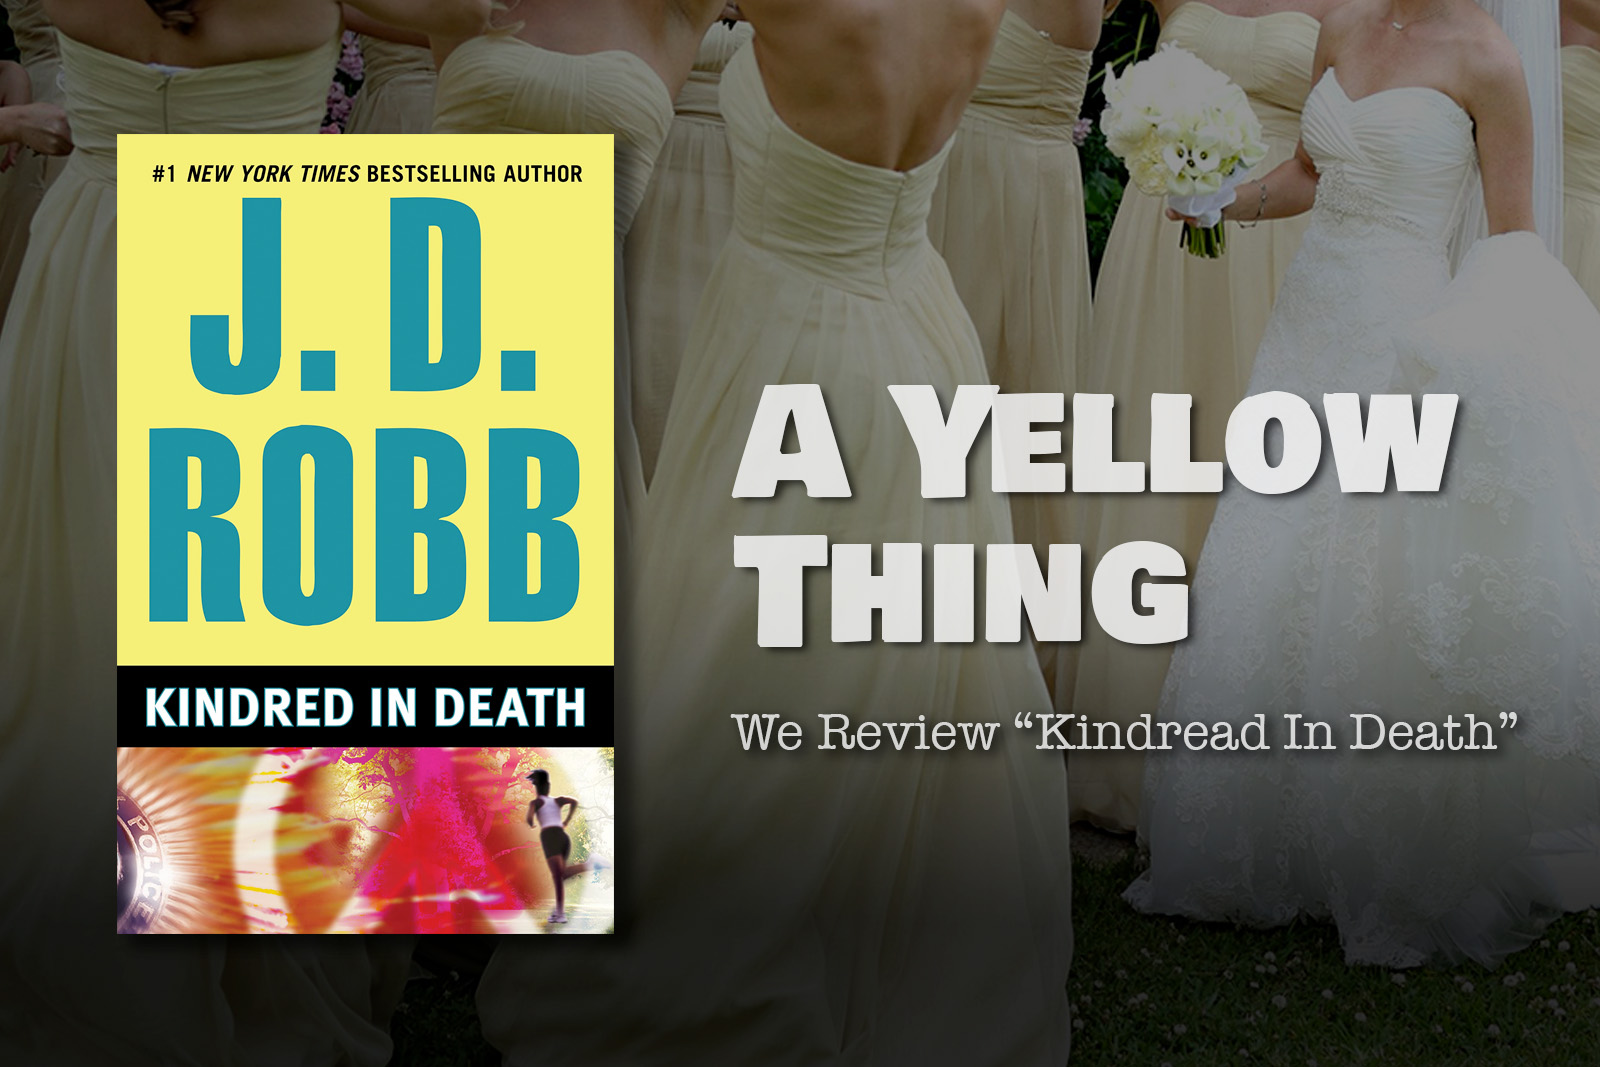 A Yellow Thing – We Review “Kindred in Death”